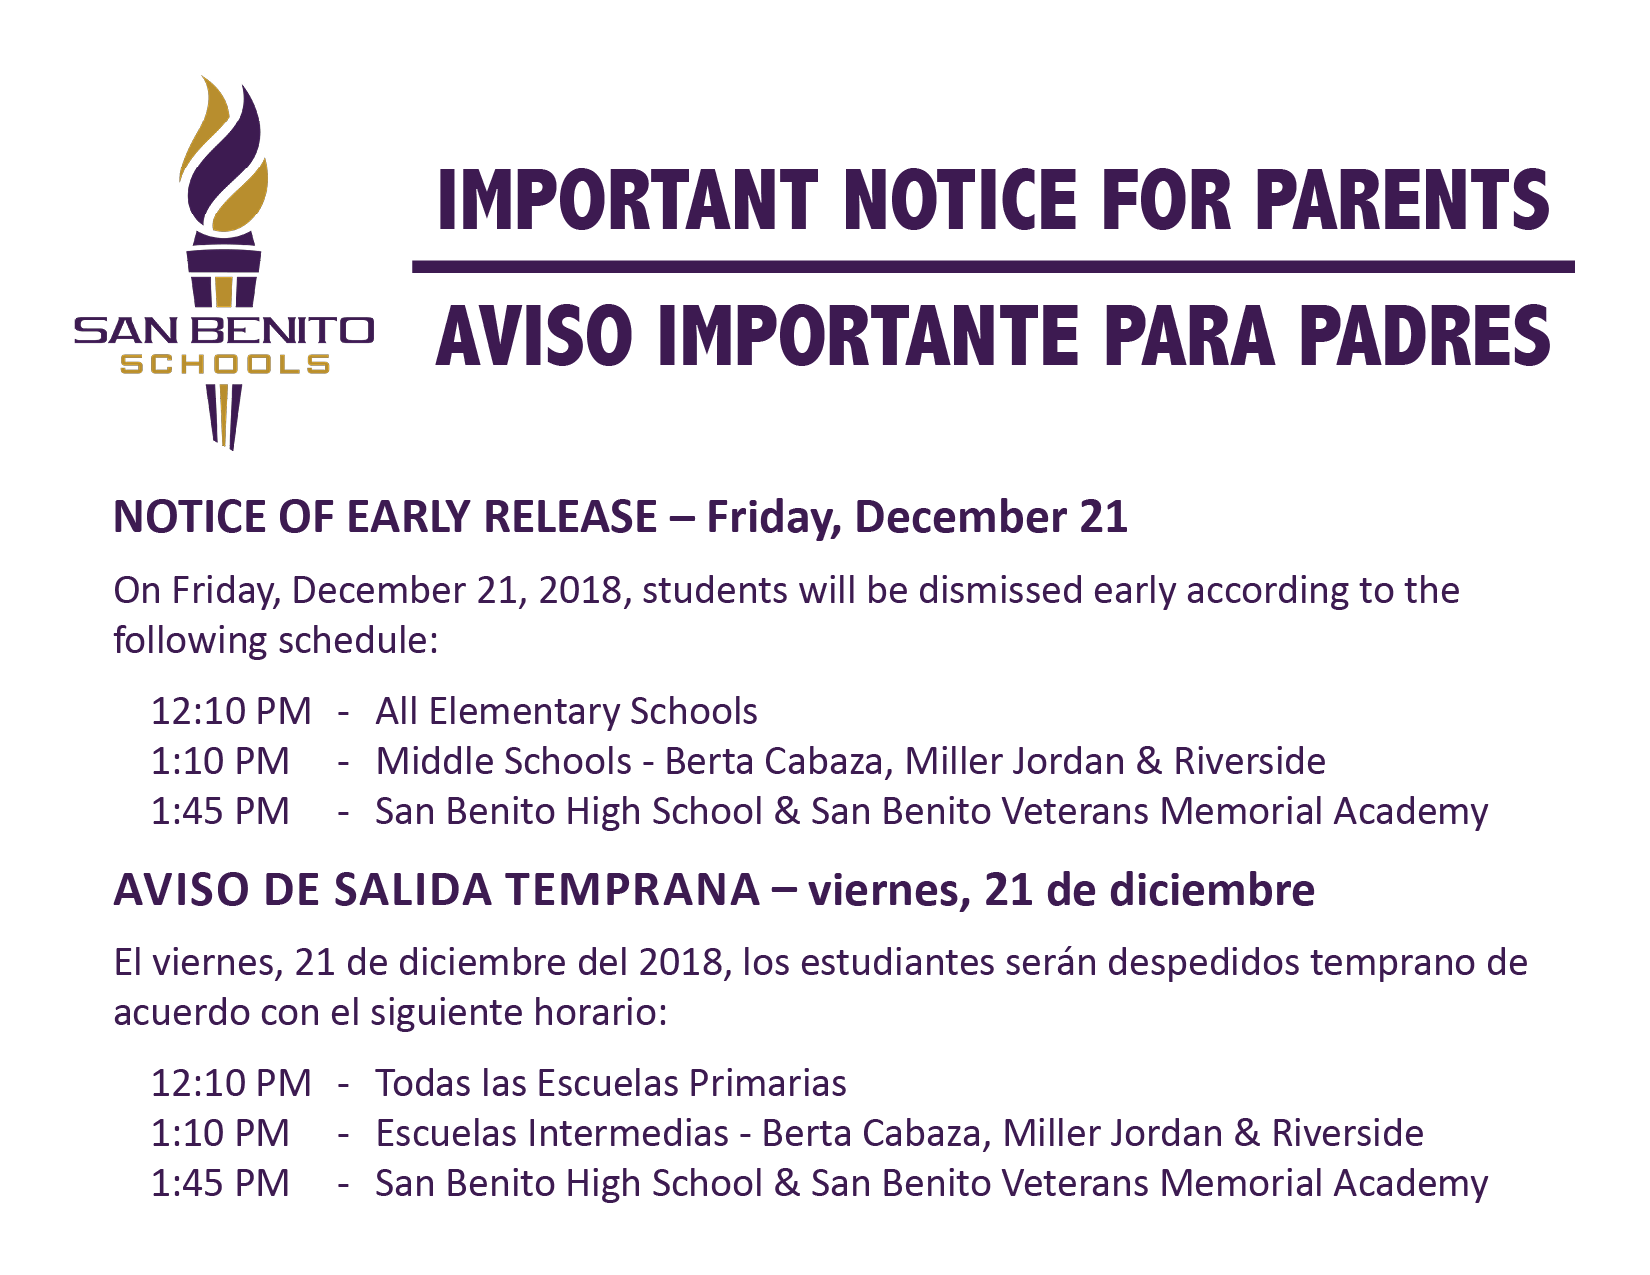 Notice of Early Release